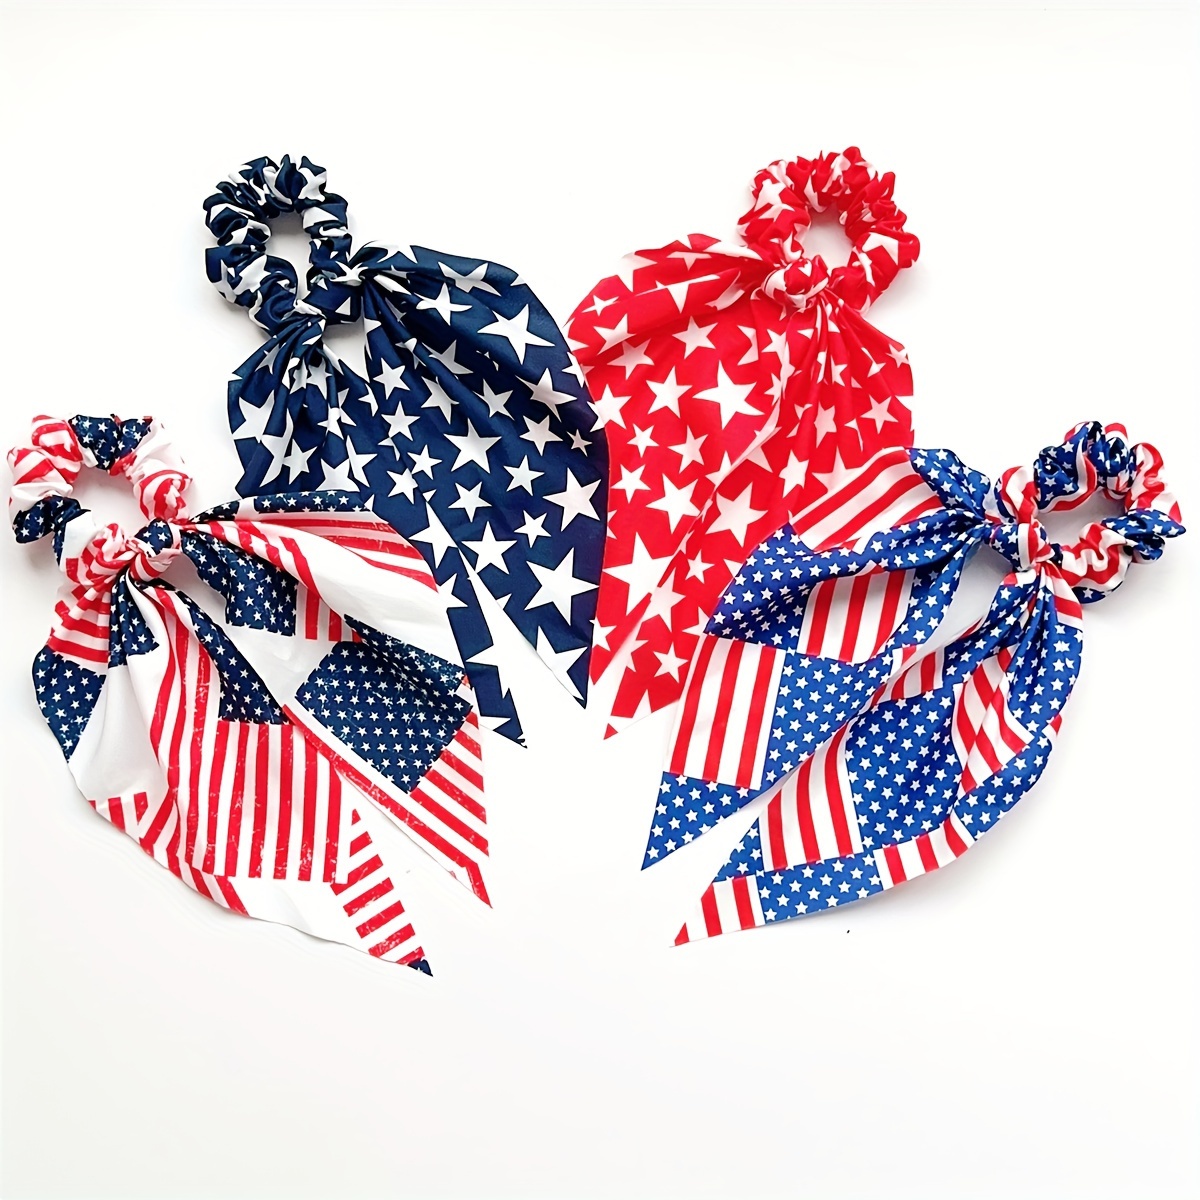 

4-piece Patriotic Hair Tie Set - American Flag Bowknot Scrunchies For Women & Girls, Elegant Independence Day Accessories